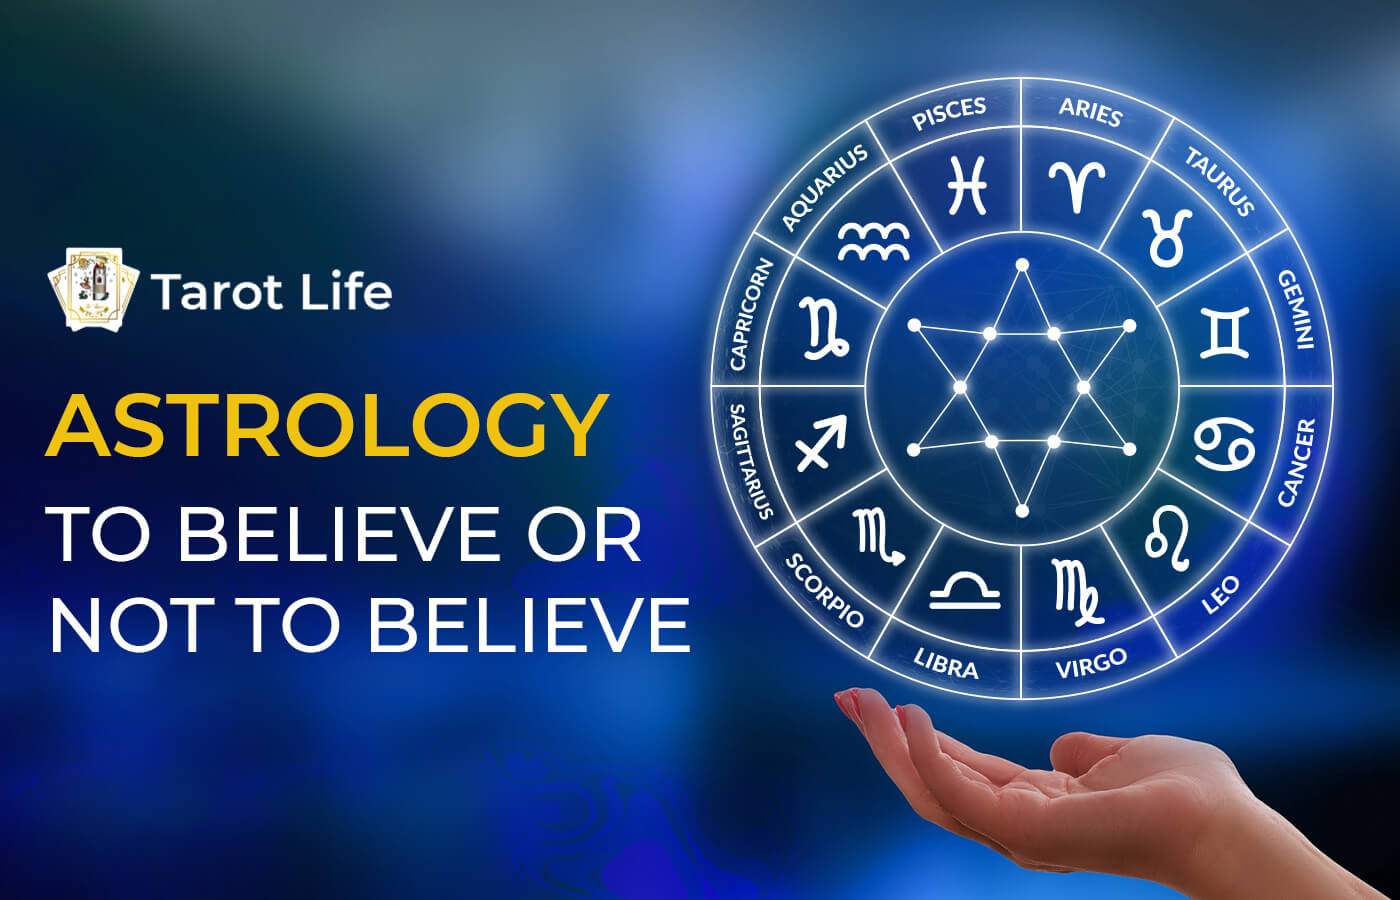 Astrology To believe or not to believe